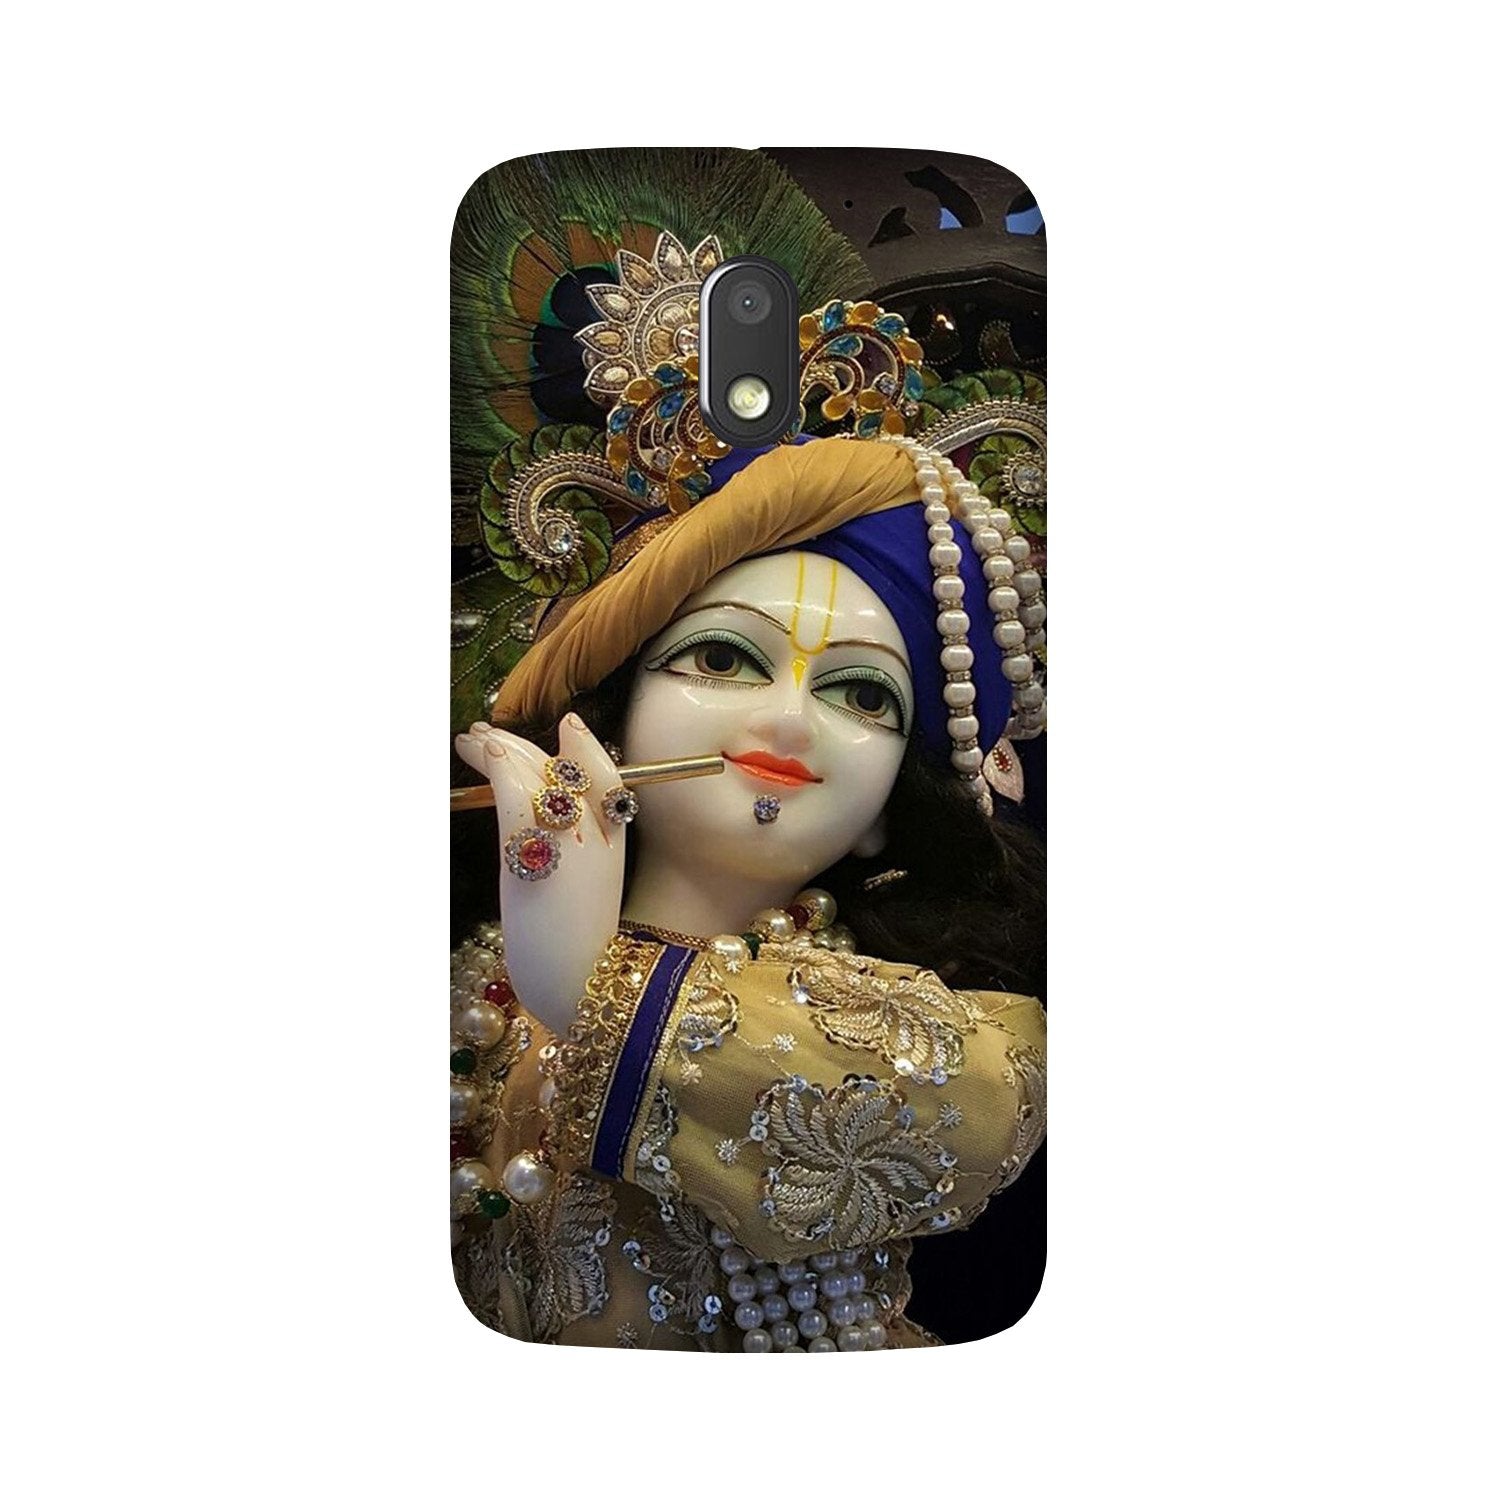 Lord Krishna3 Case for Moto G4 Play